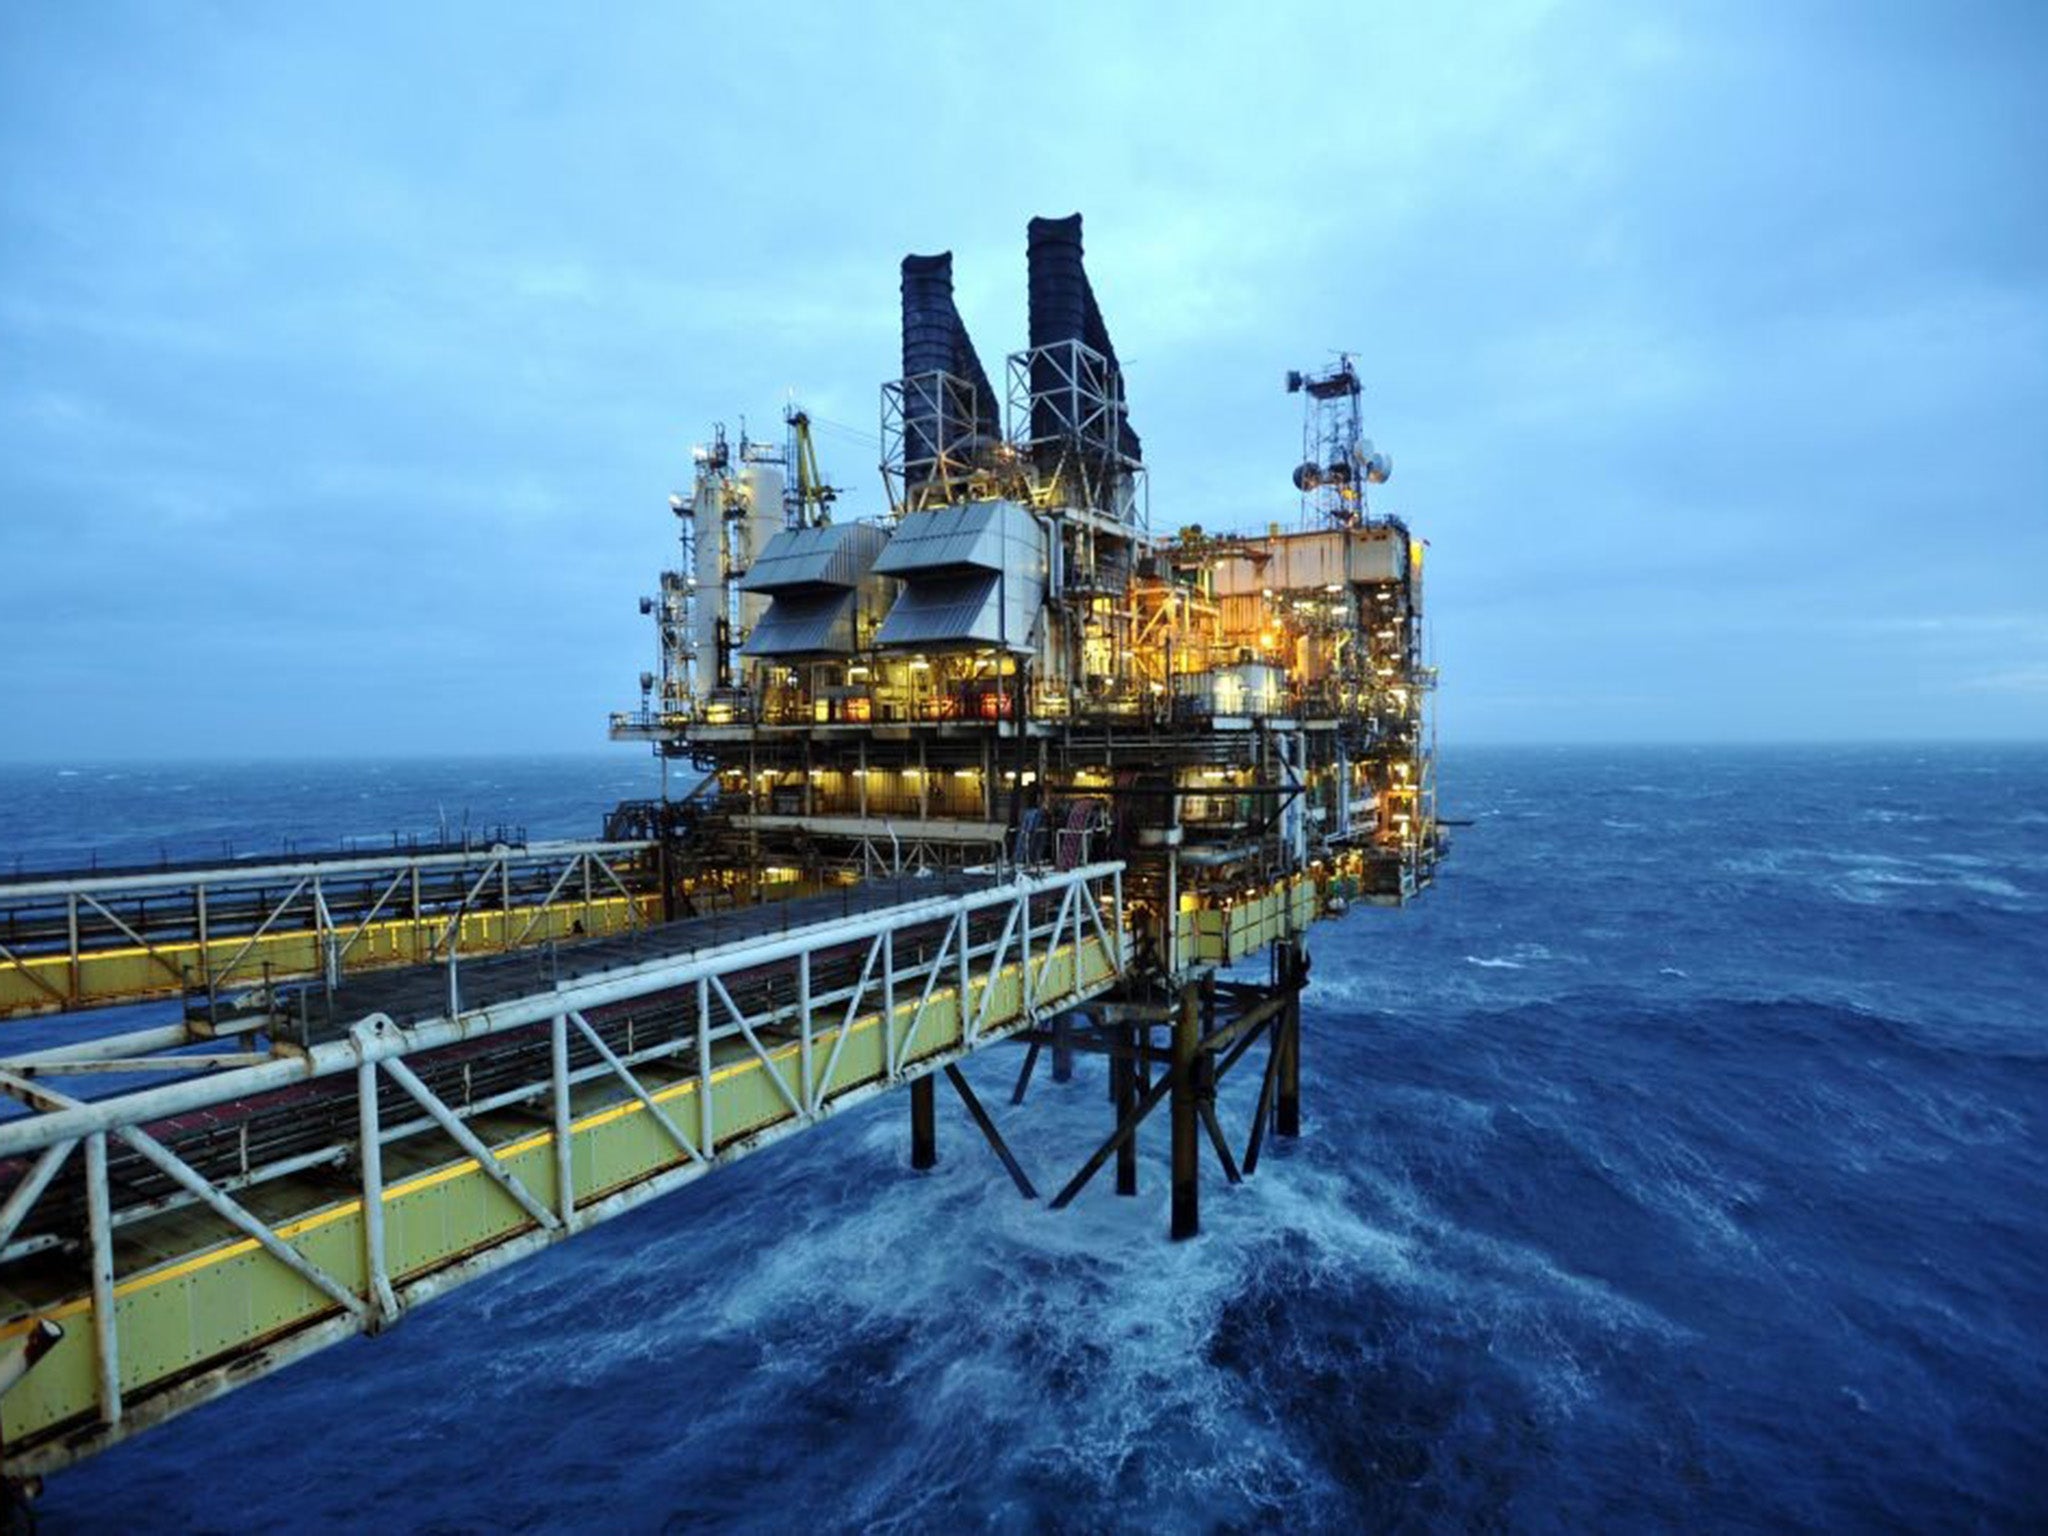 The North Sea oil and gas industries will benefit from the scrapping of petroleum revenue tax, but the renewable energy sector will get less support